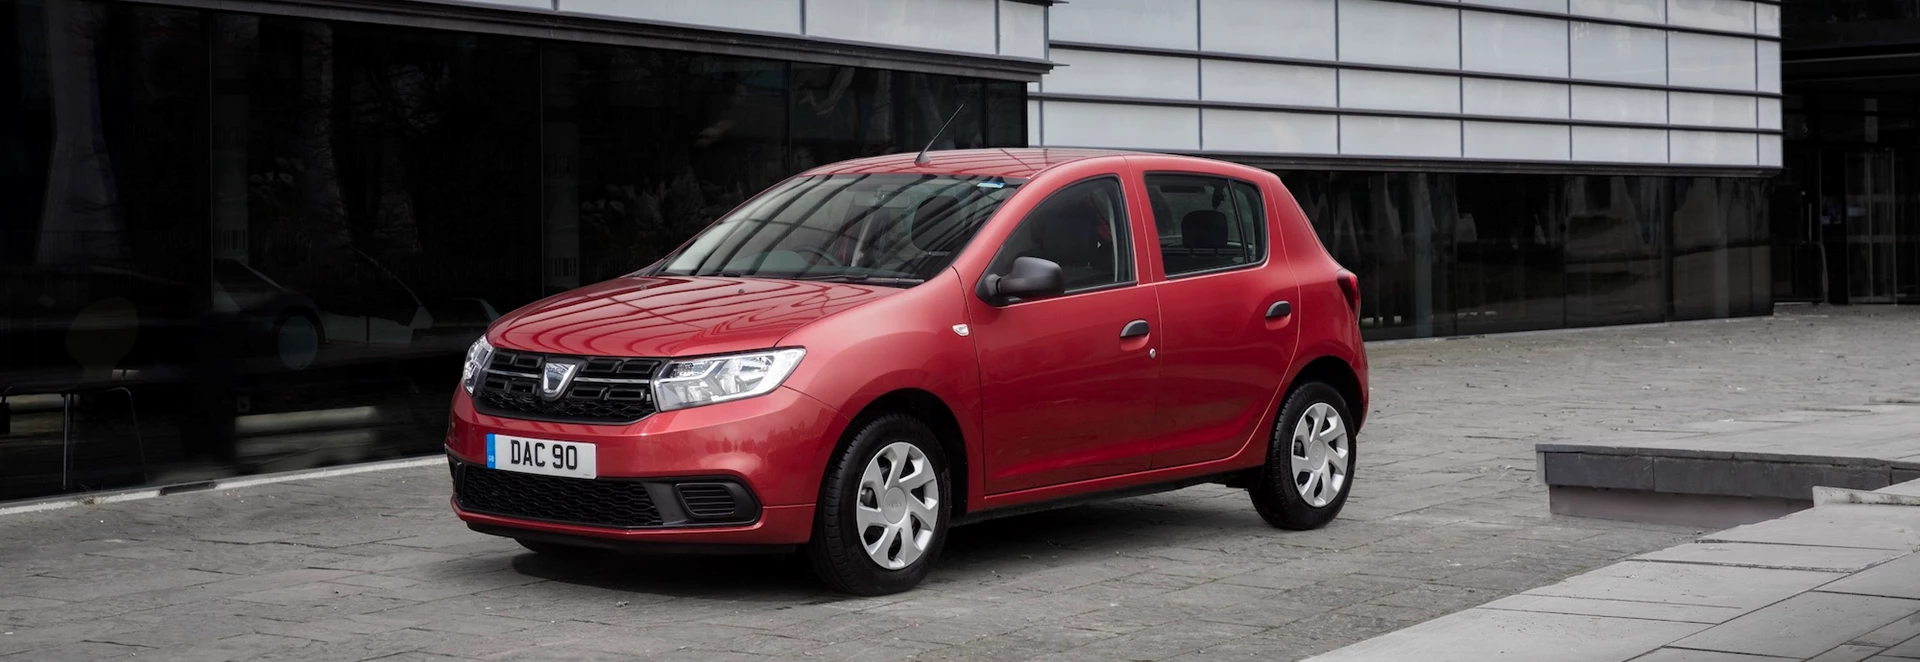 Why the Dacia Sandero is great value for money 